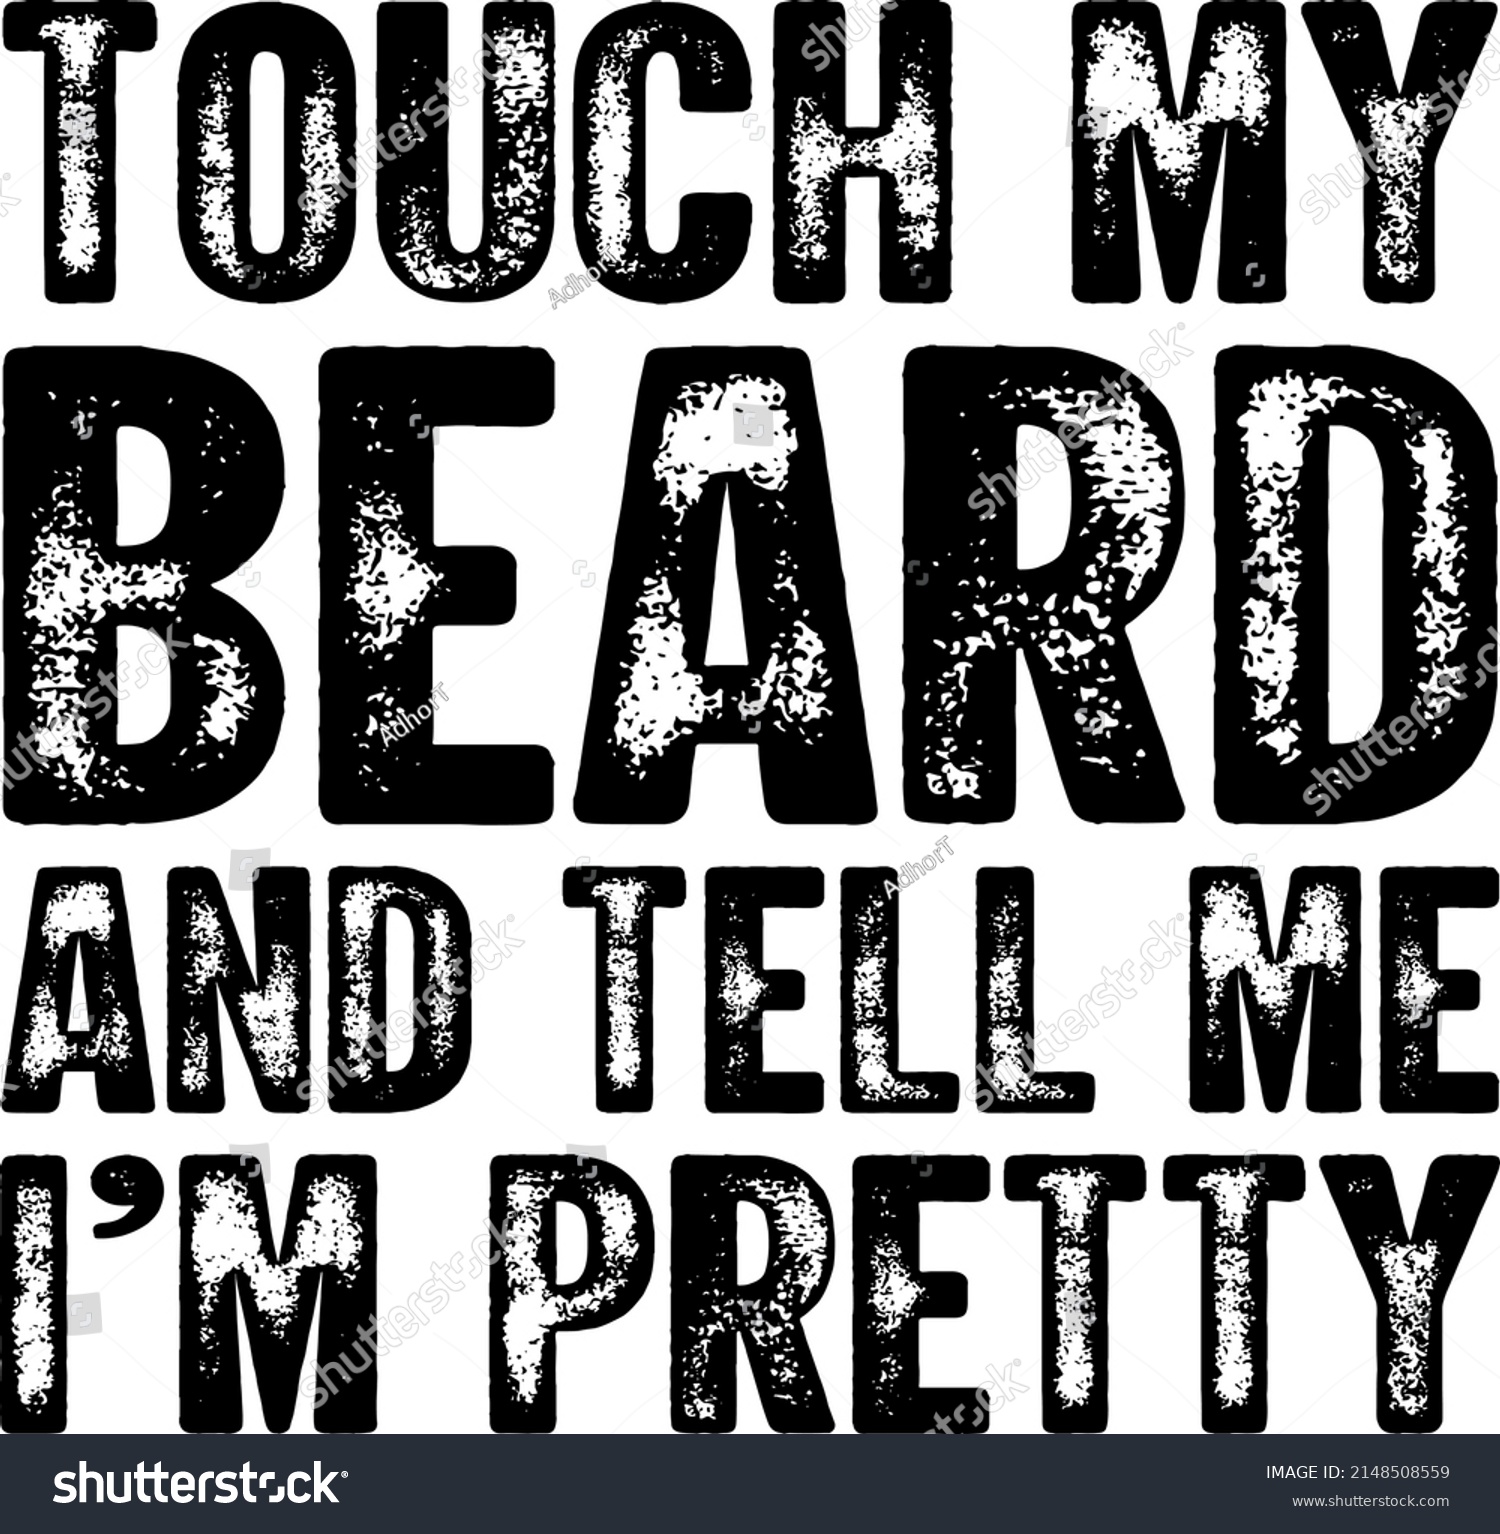 SVG of Beard shirts for Men Touch My Beard And Tell Me I'm Pretty T-Shirt svg